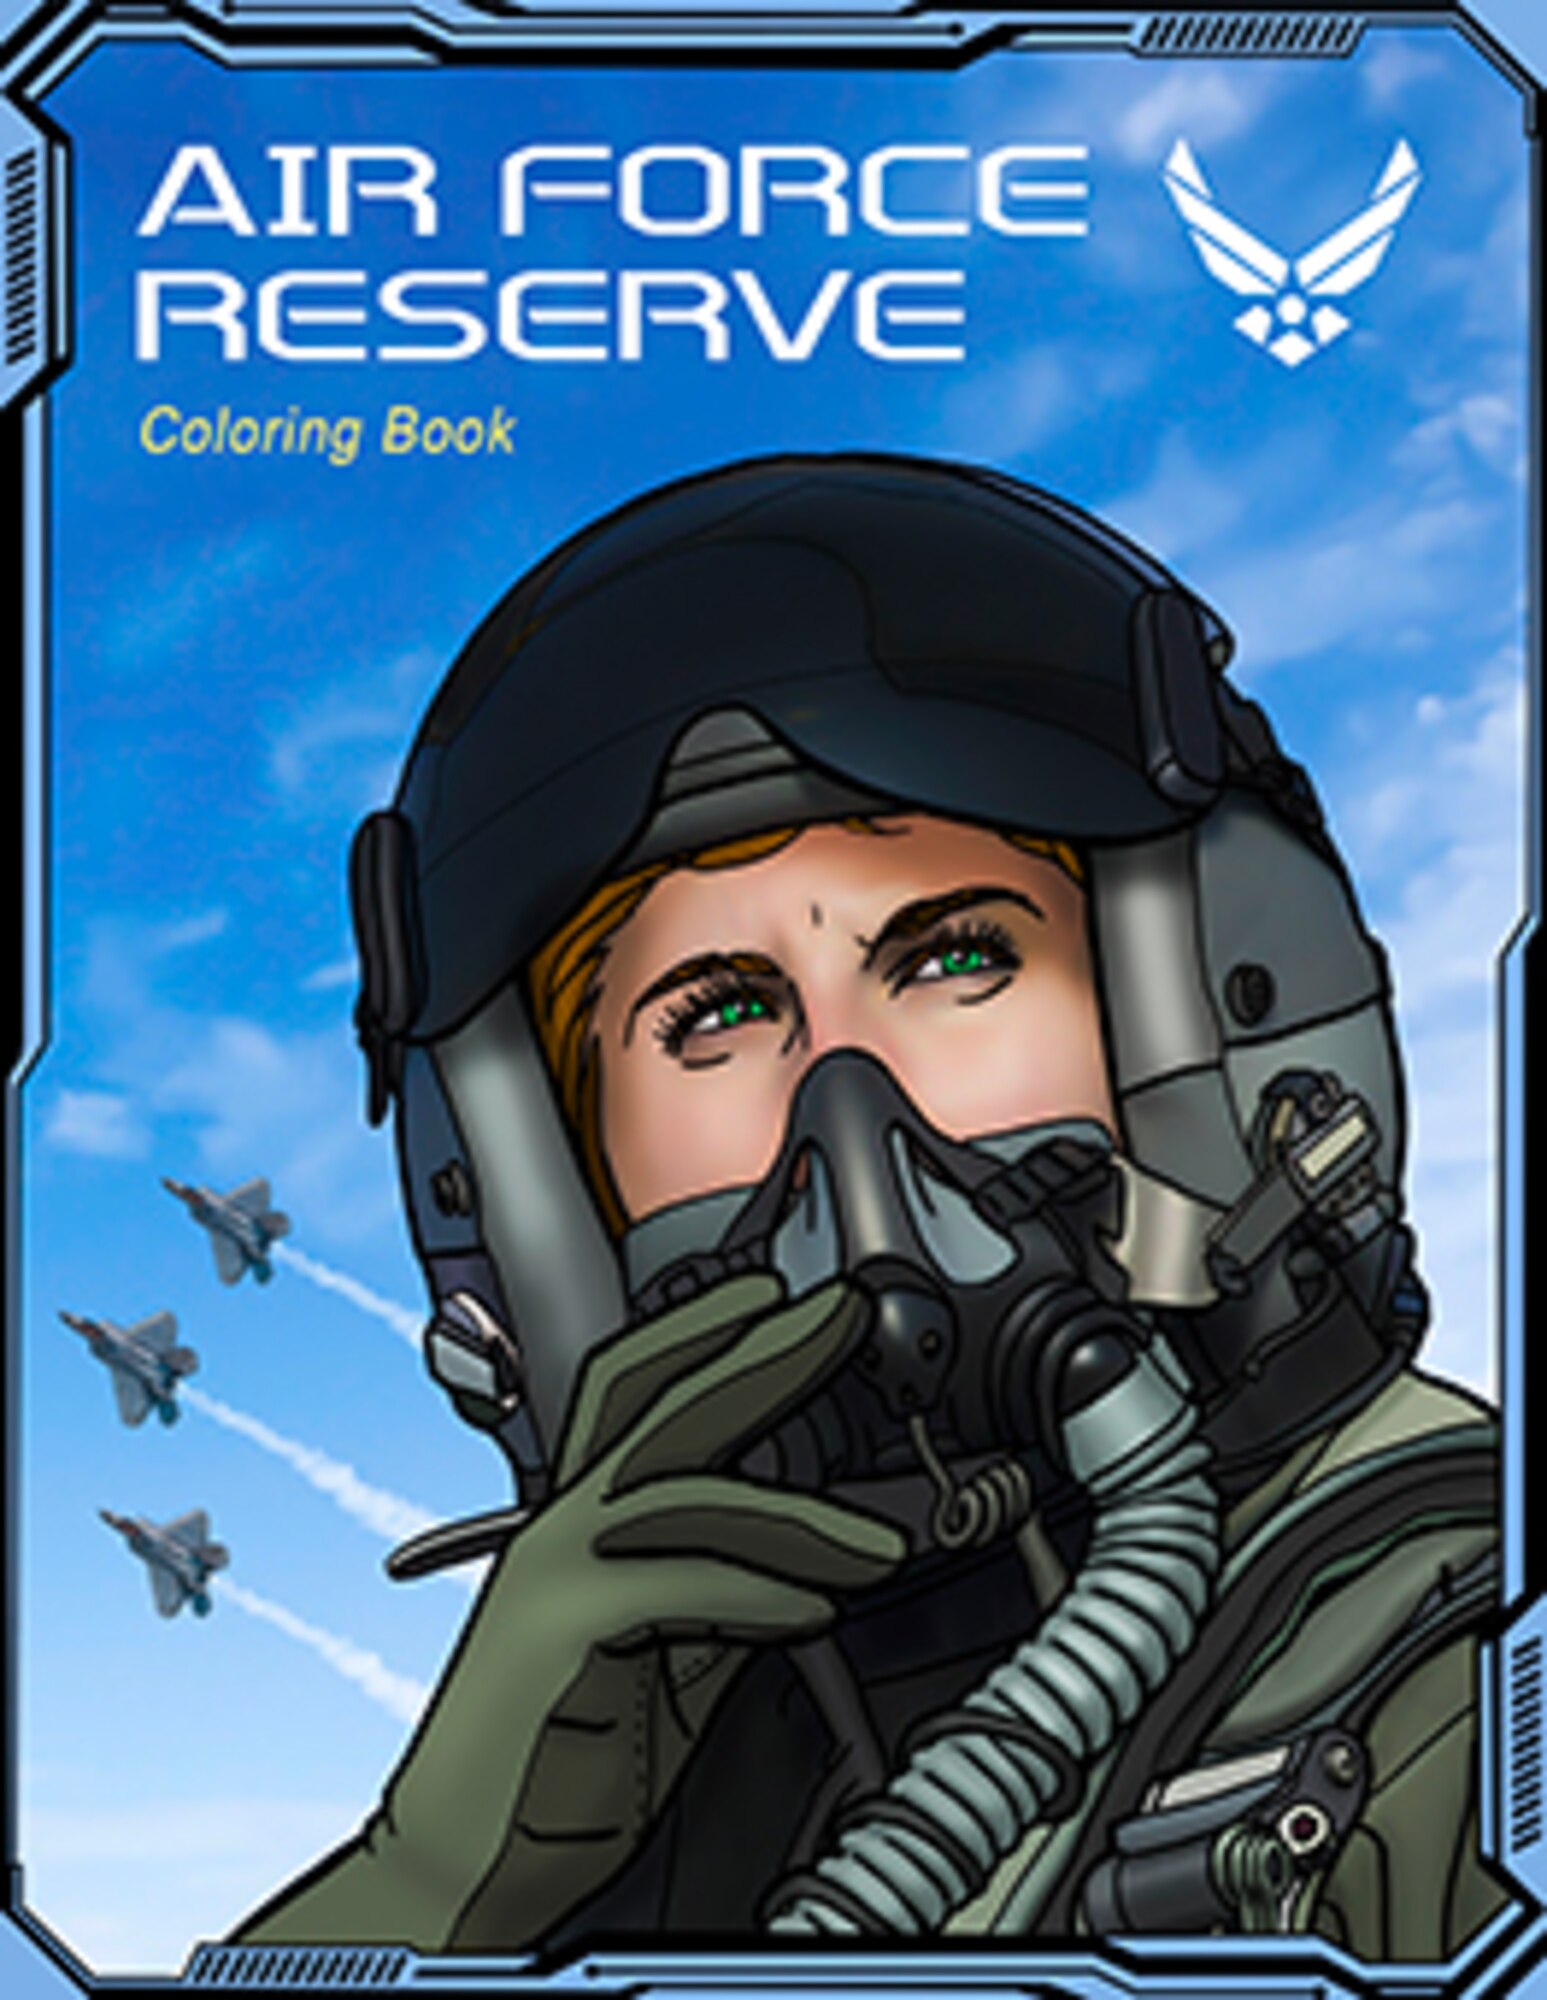 Air Force Reserve Coloring Book, 2nd Edition, released in December 2020 by the Air Force Reserve Command Office of History and Heritage.